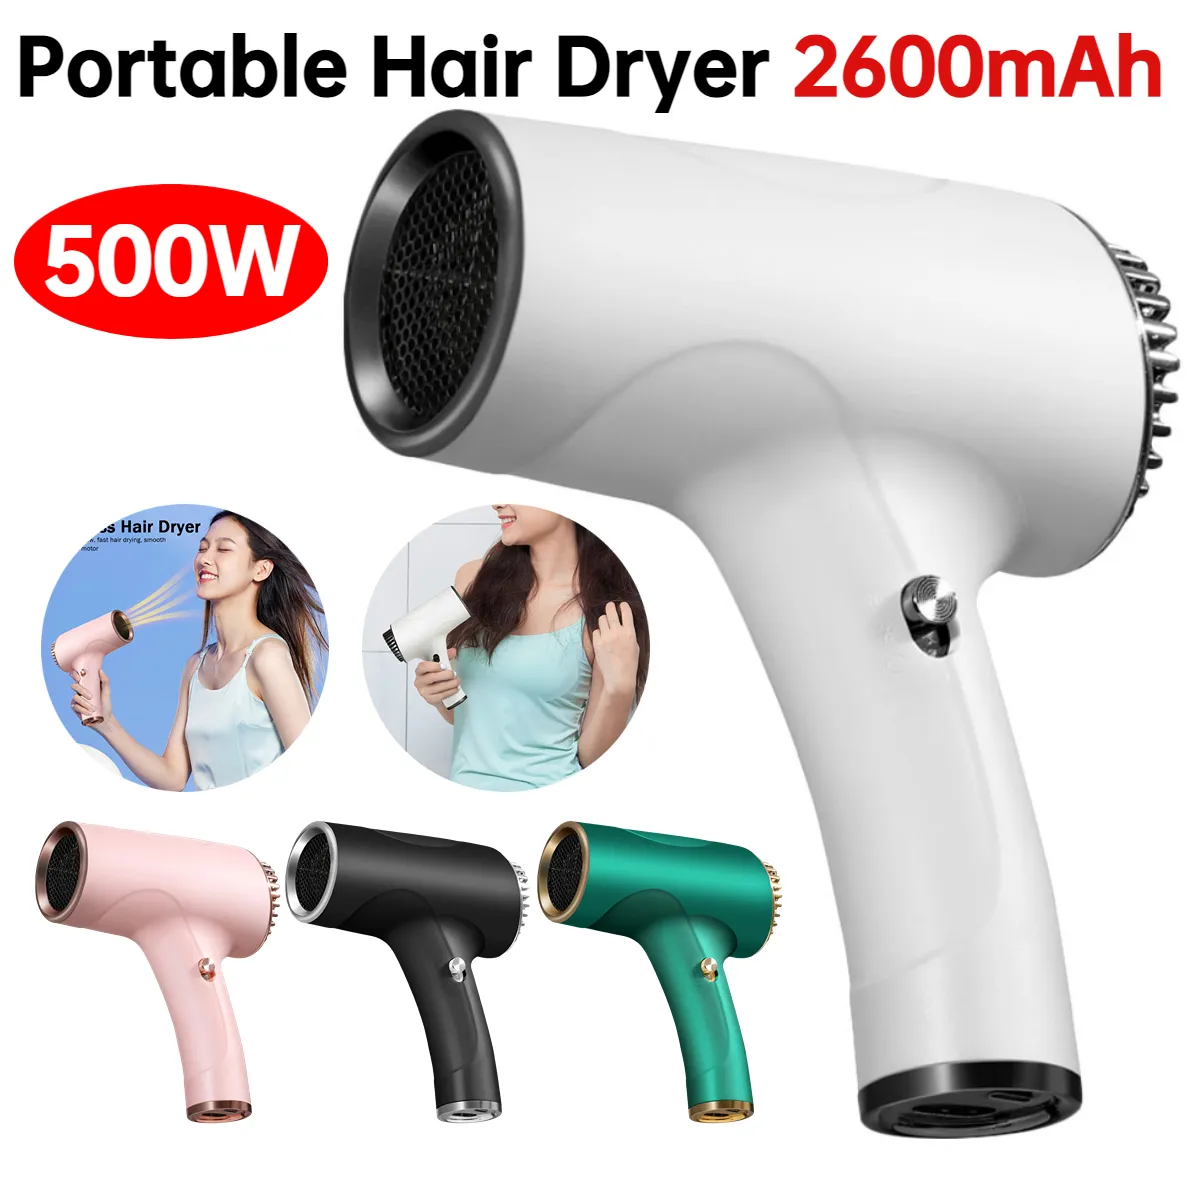 Portable Hair Dryer 2600mah Cordless Handy 2 Gears Powerful Hairdryer Rechargeable USB Cordless Versatile Hairdressing Tool